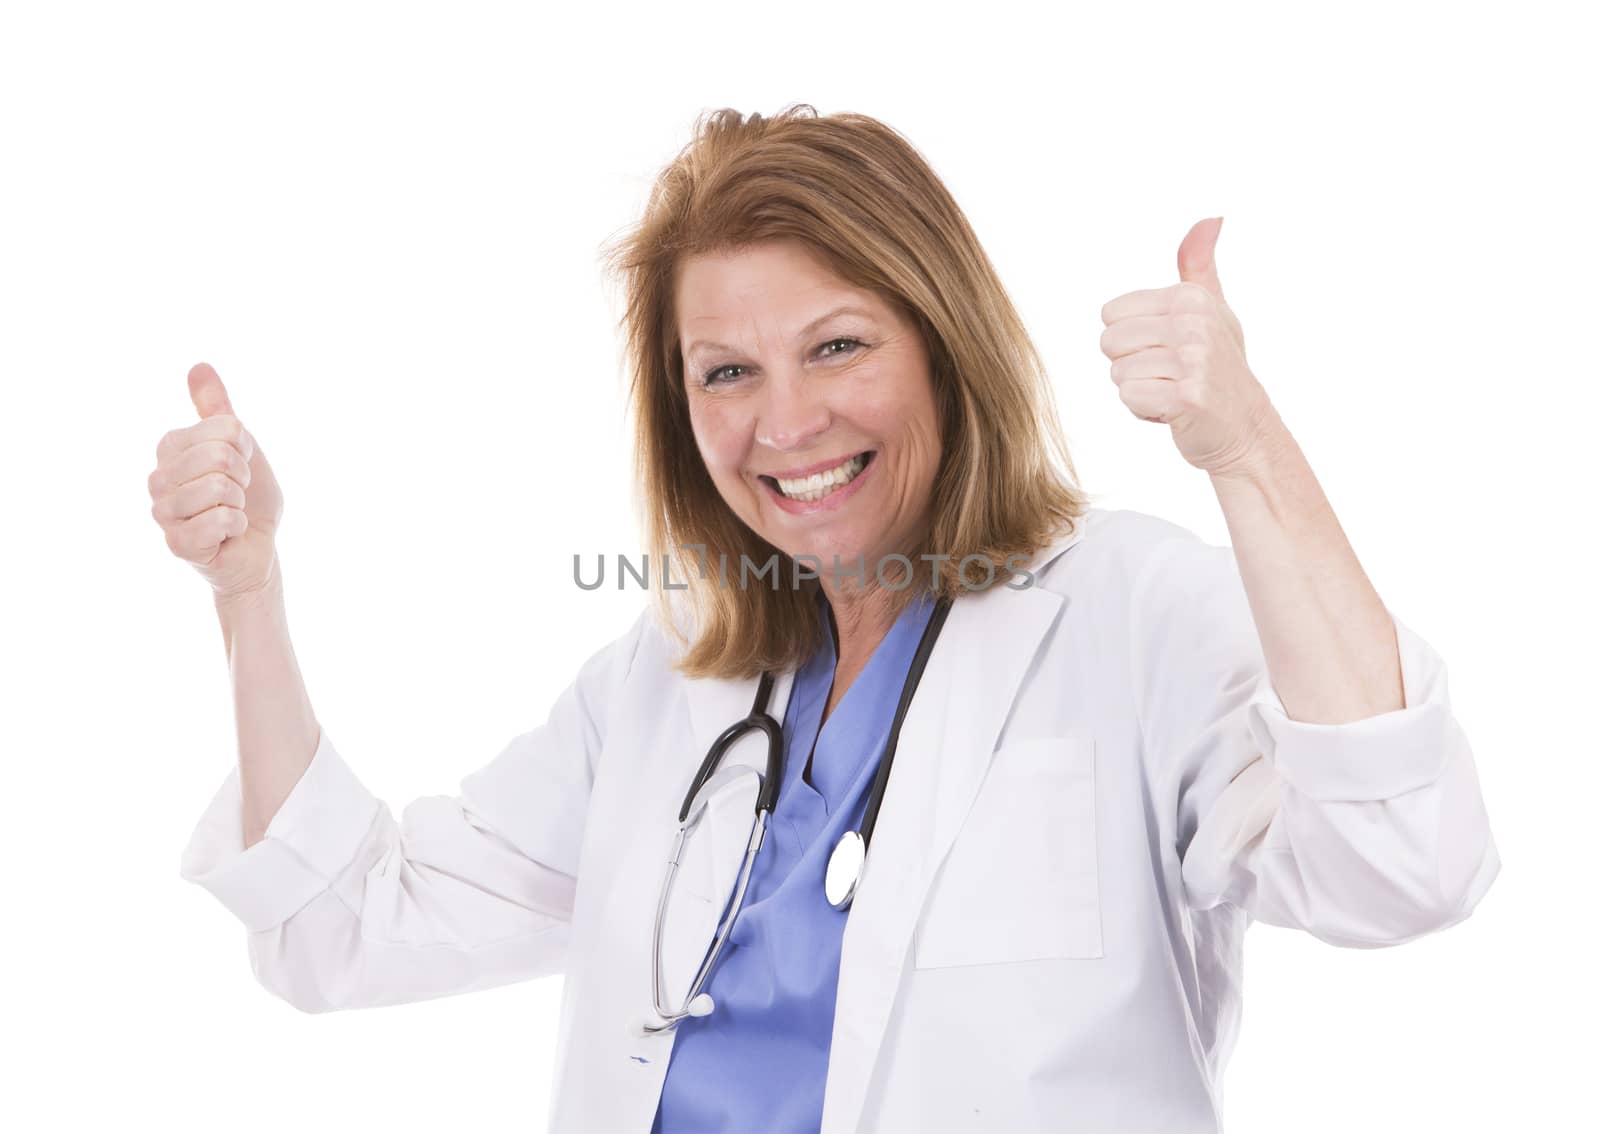 caucasian woman wearing doctor's scrubs on white background